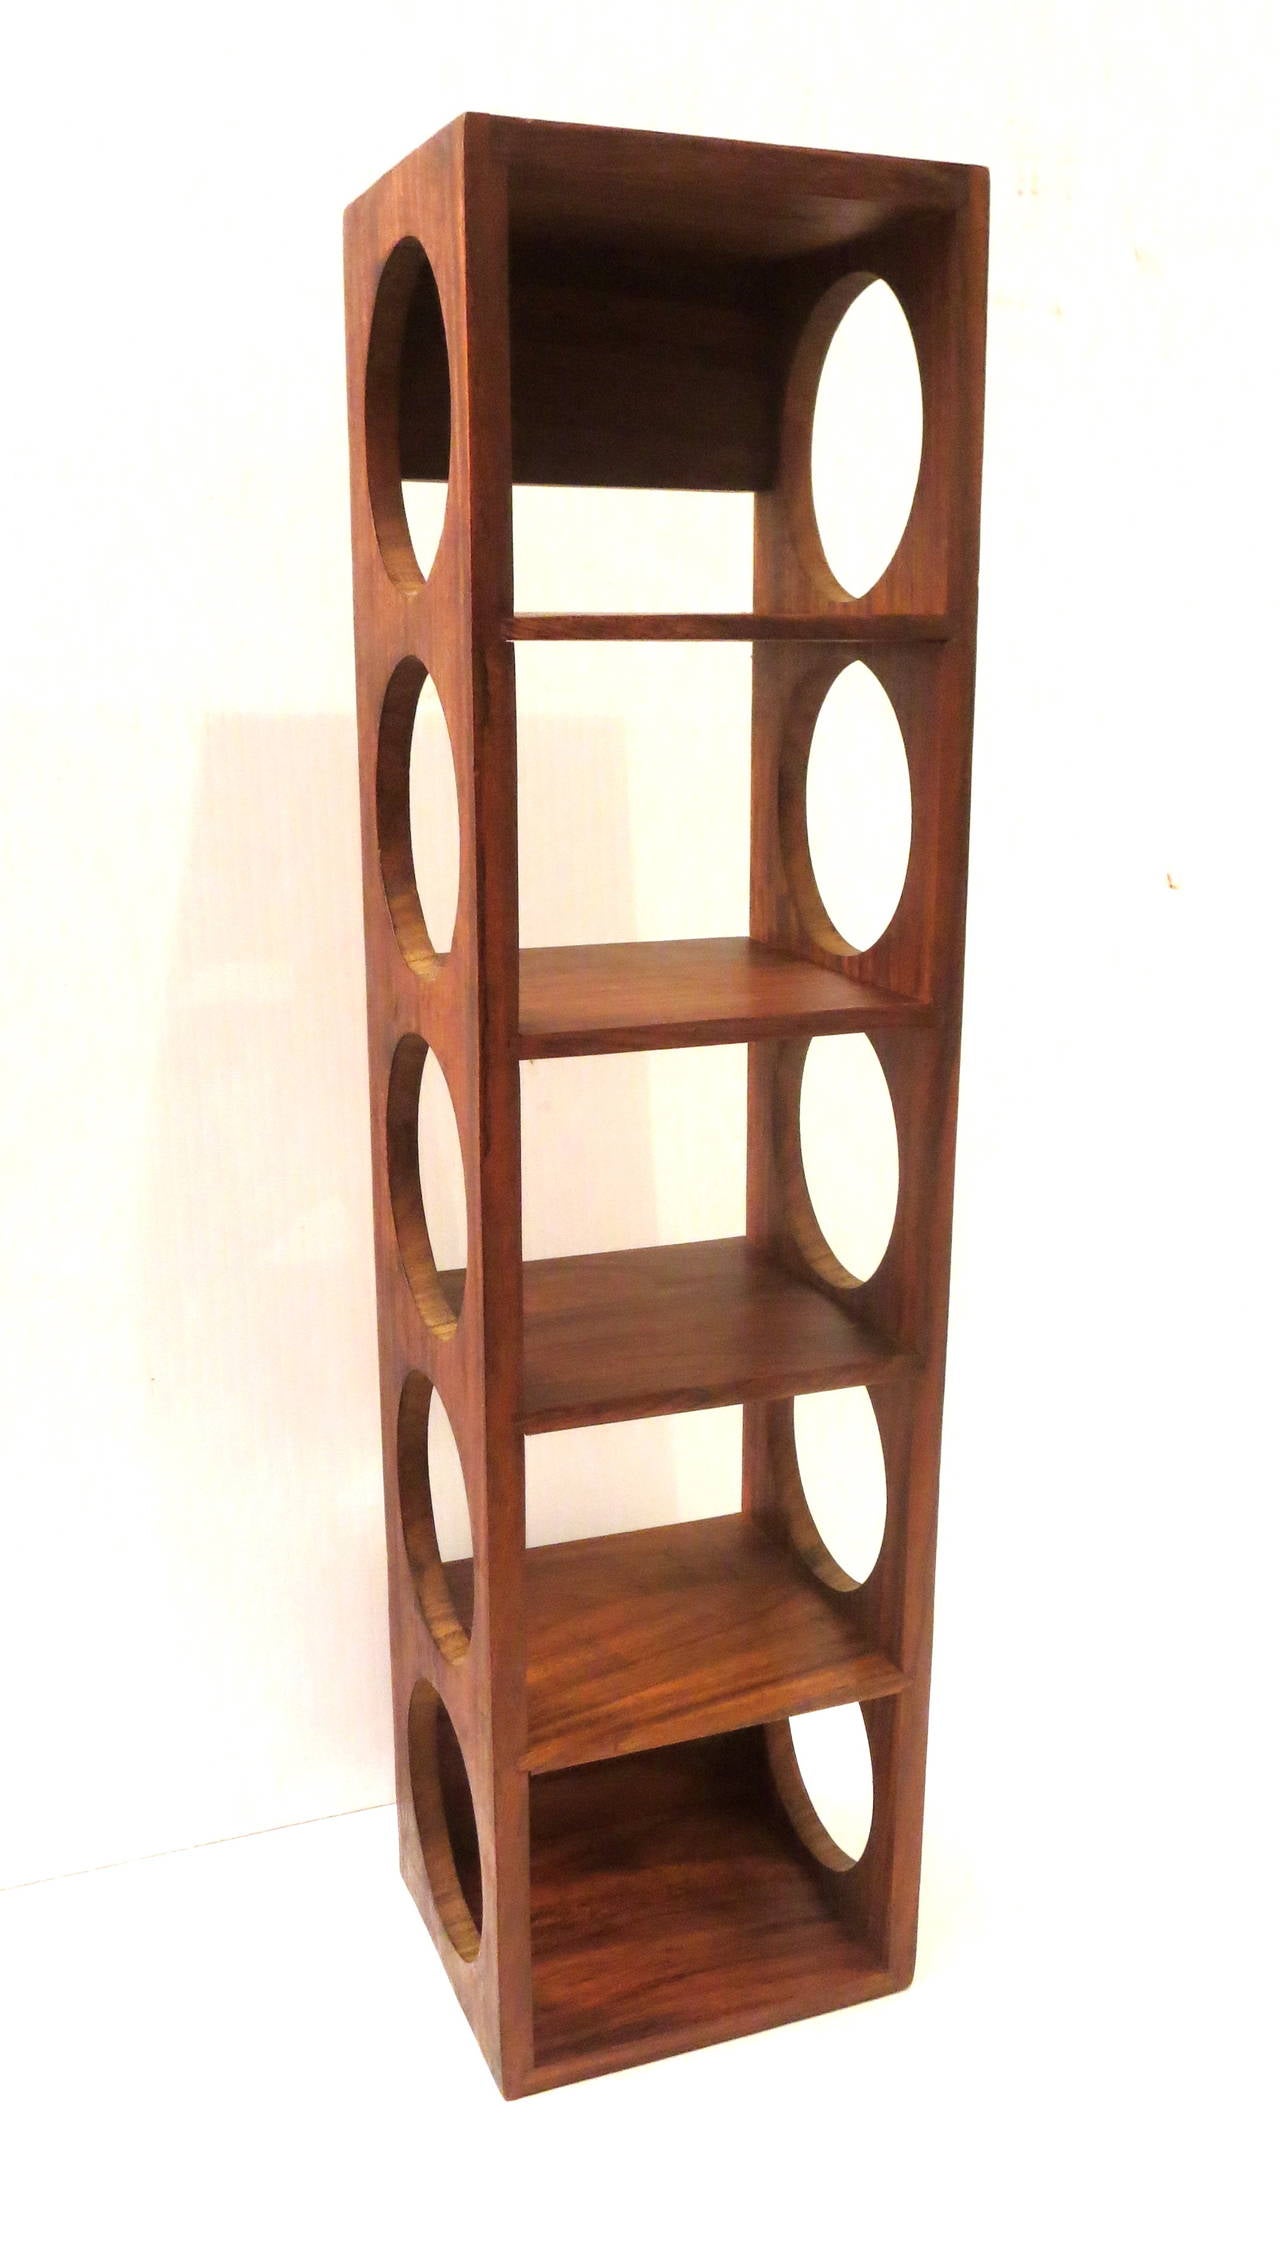 A rare five bottle capacity, solid rosewood wine rack easy to install great condition.